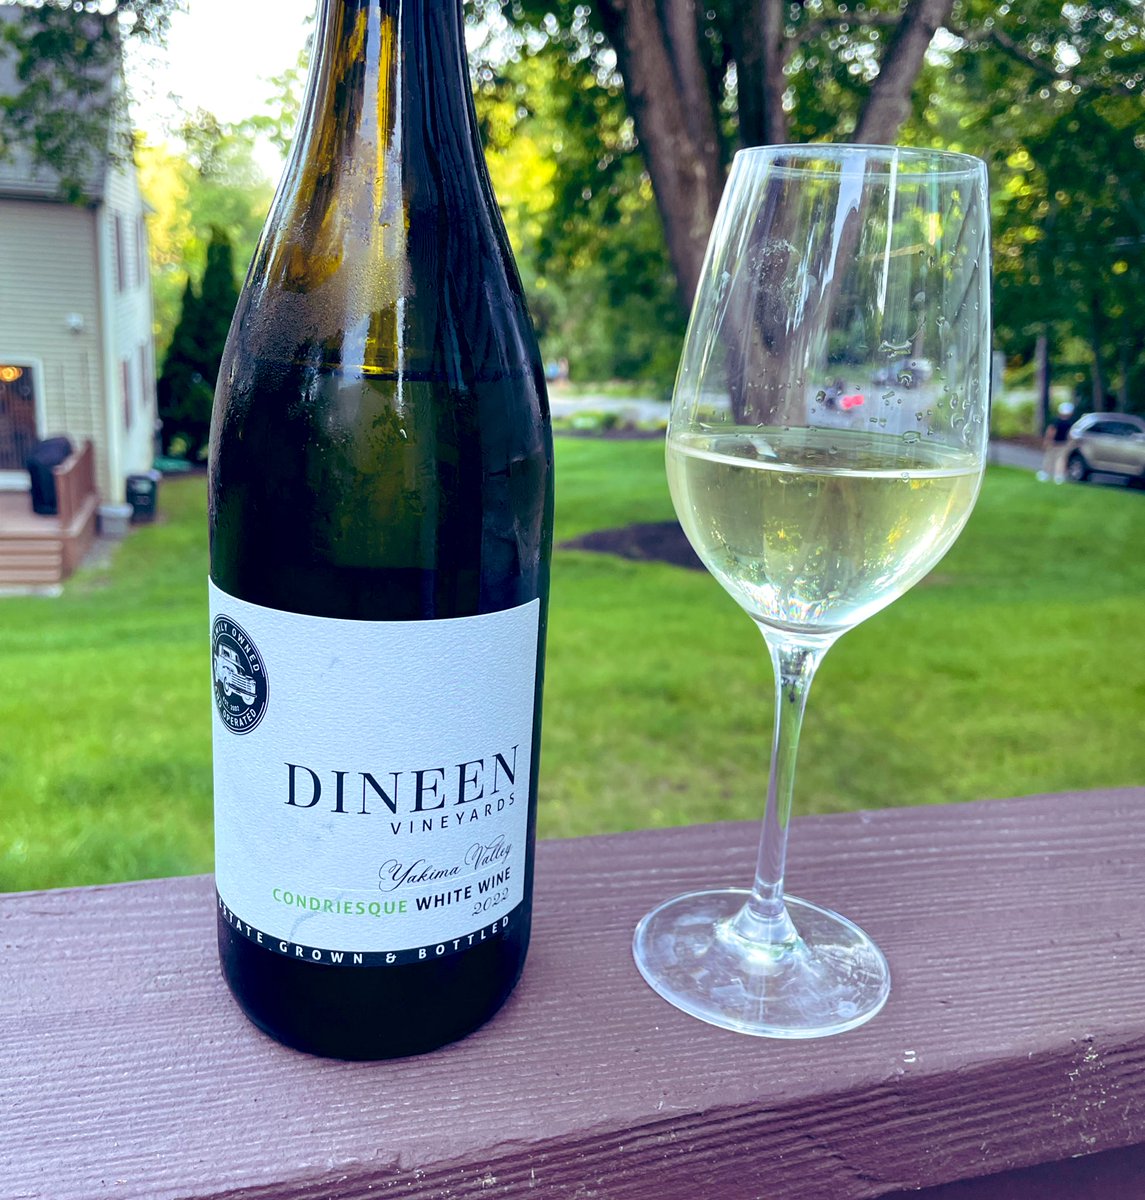 The Dineen Vineyards Condriesque, a white Rhône blend, is nice choice for a summer weekend. Cheers! #wiyf #winelovers #wawine